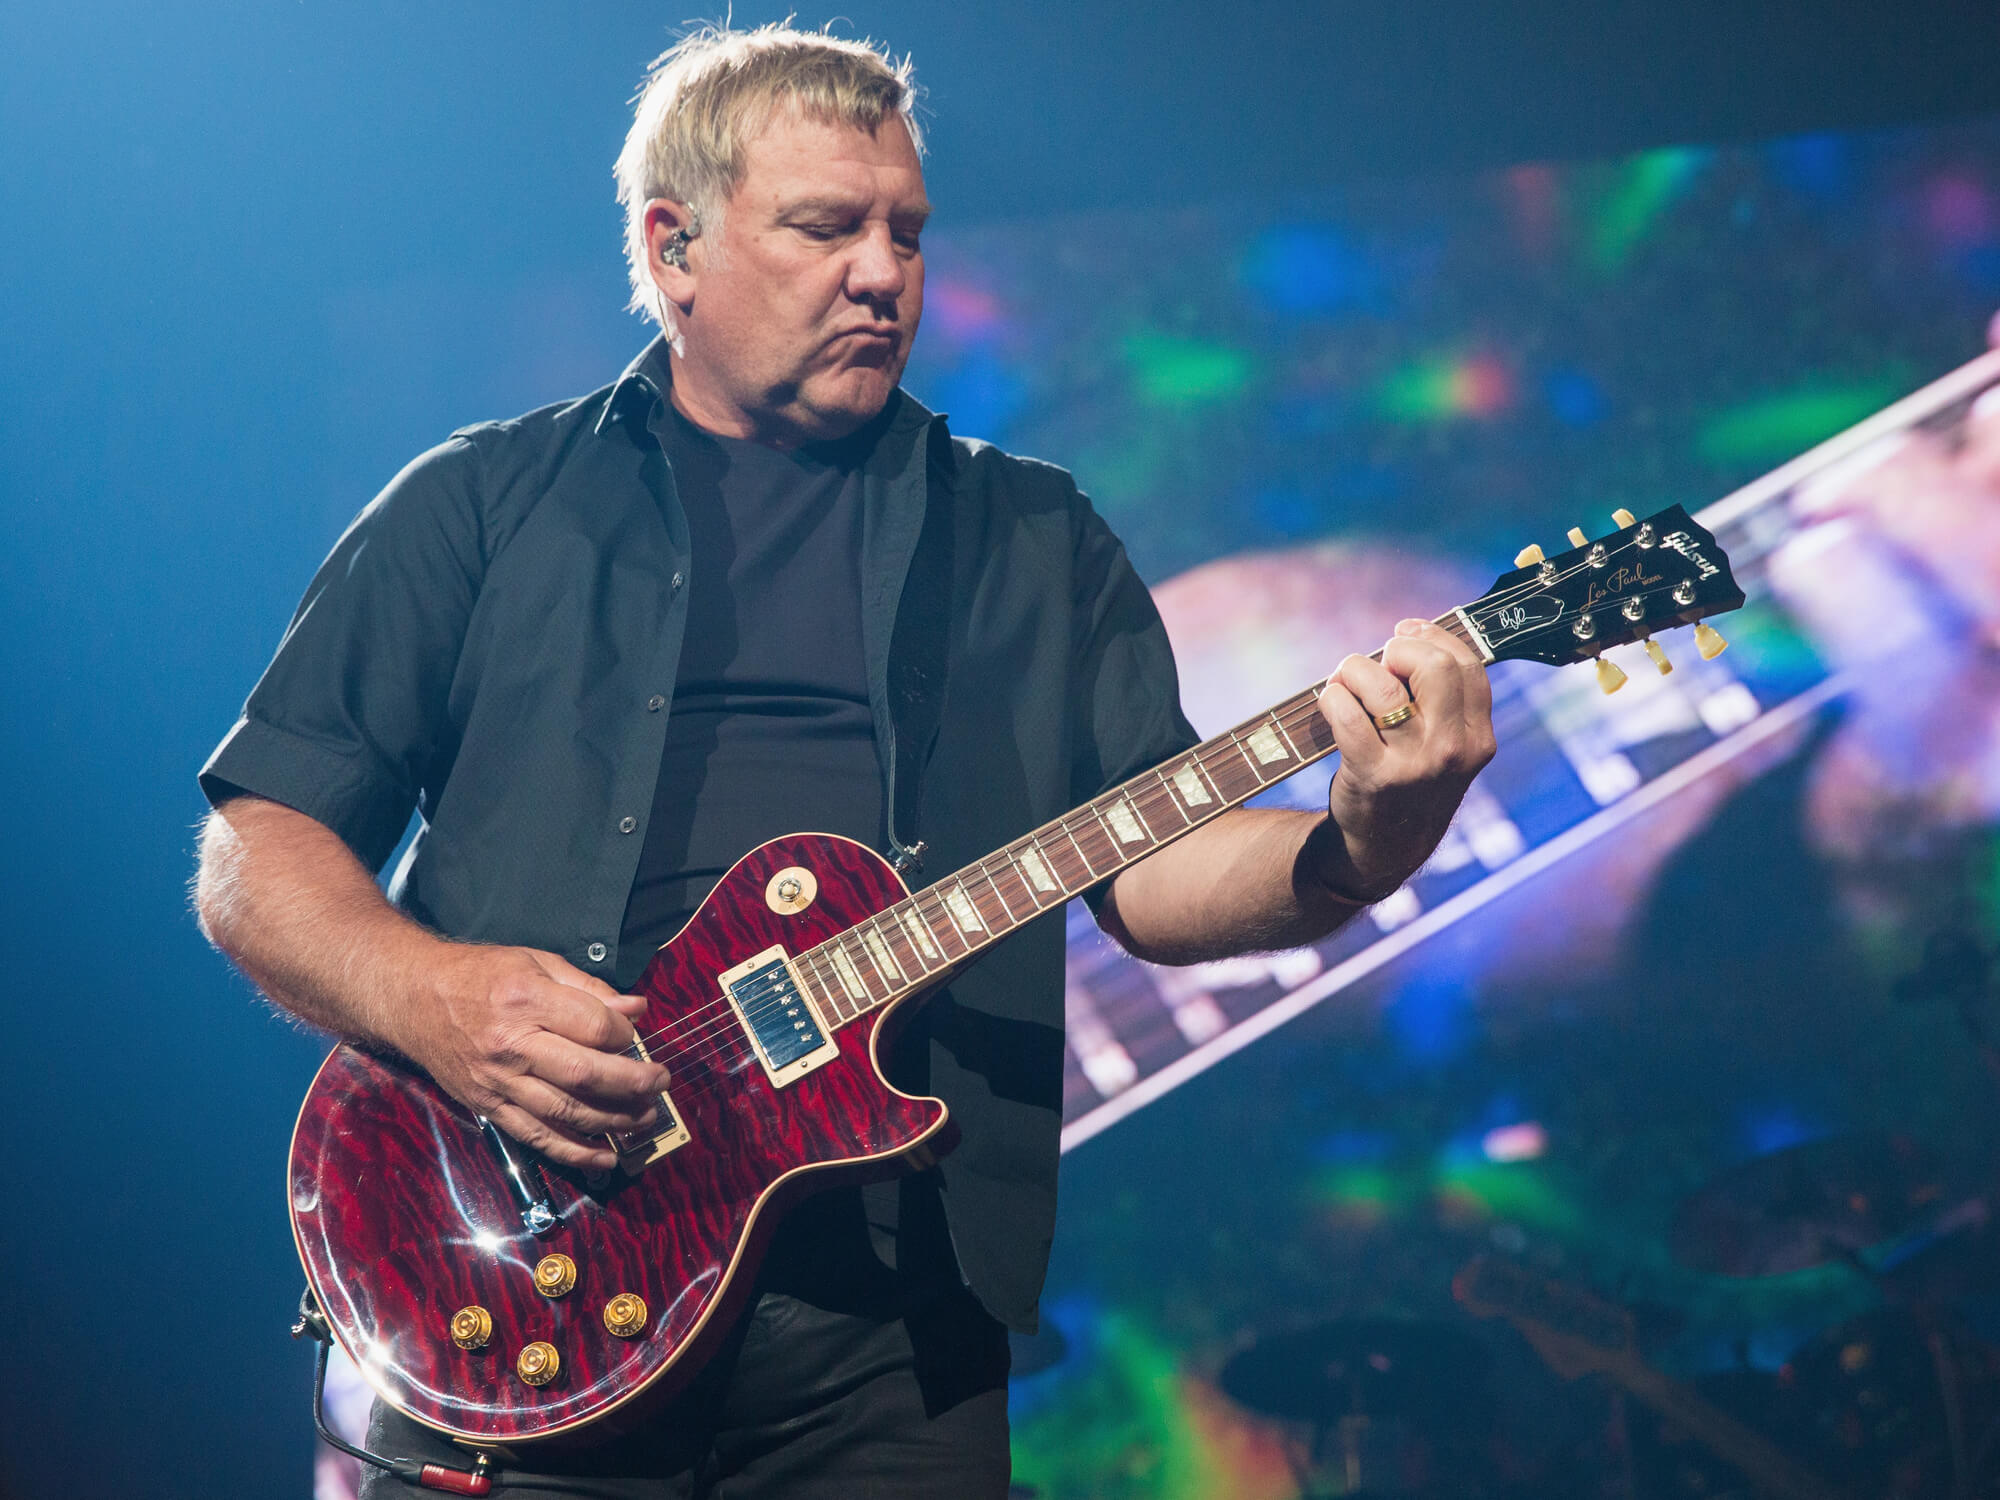 Alex Lifeson of Rush performs on stage